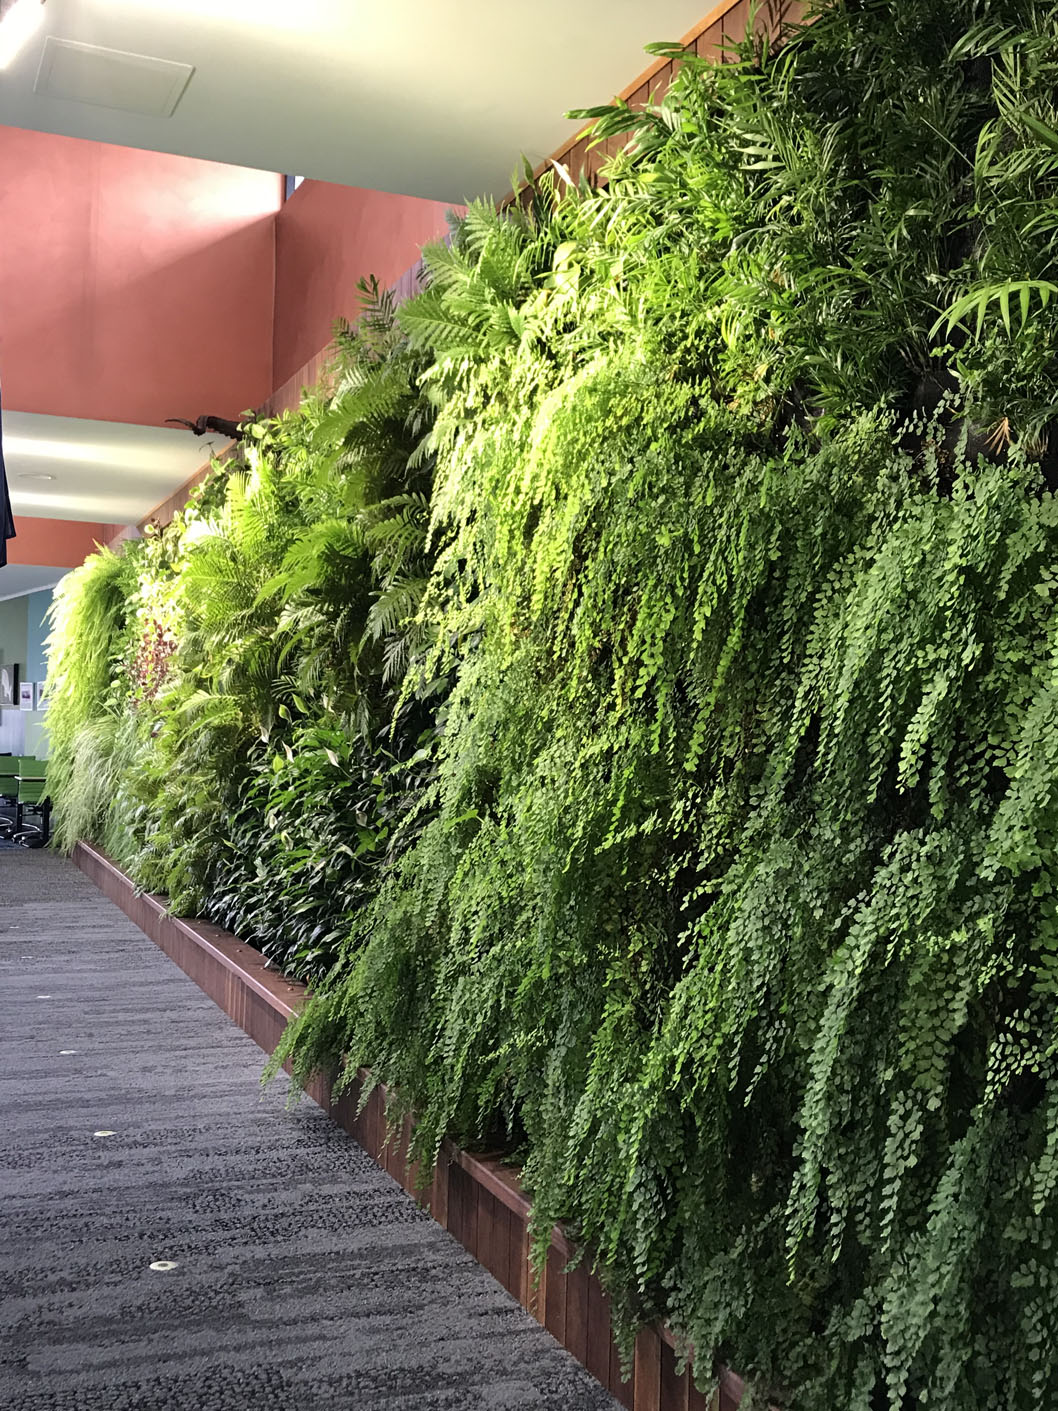 Maidenhair Ferns (Adiantum sp.) in the green wall softens the built environment as their delicate fronds help to reflect light